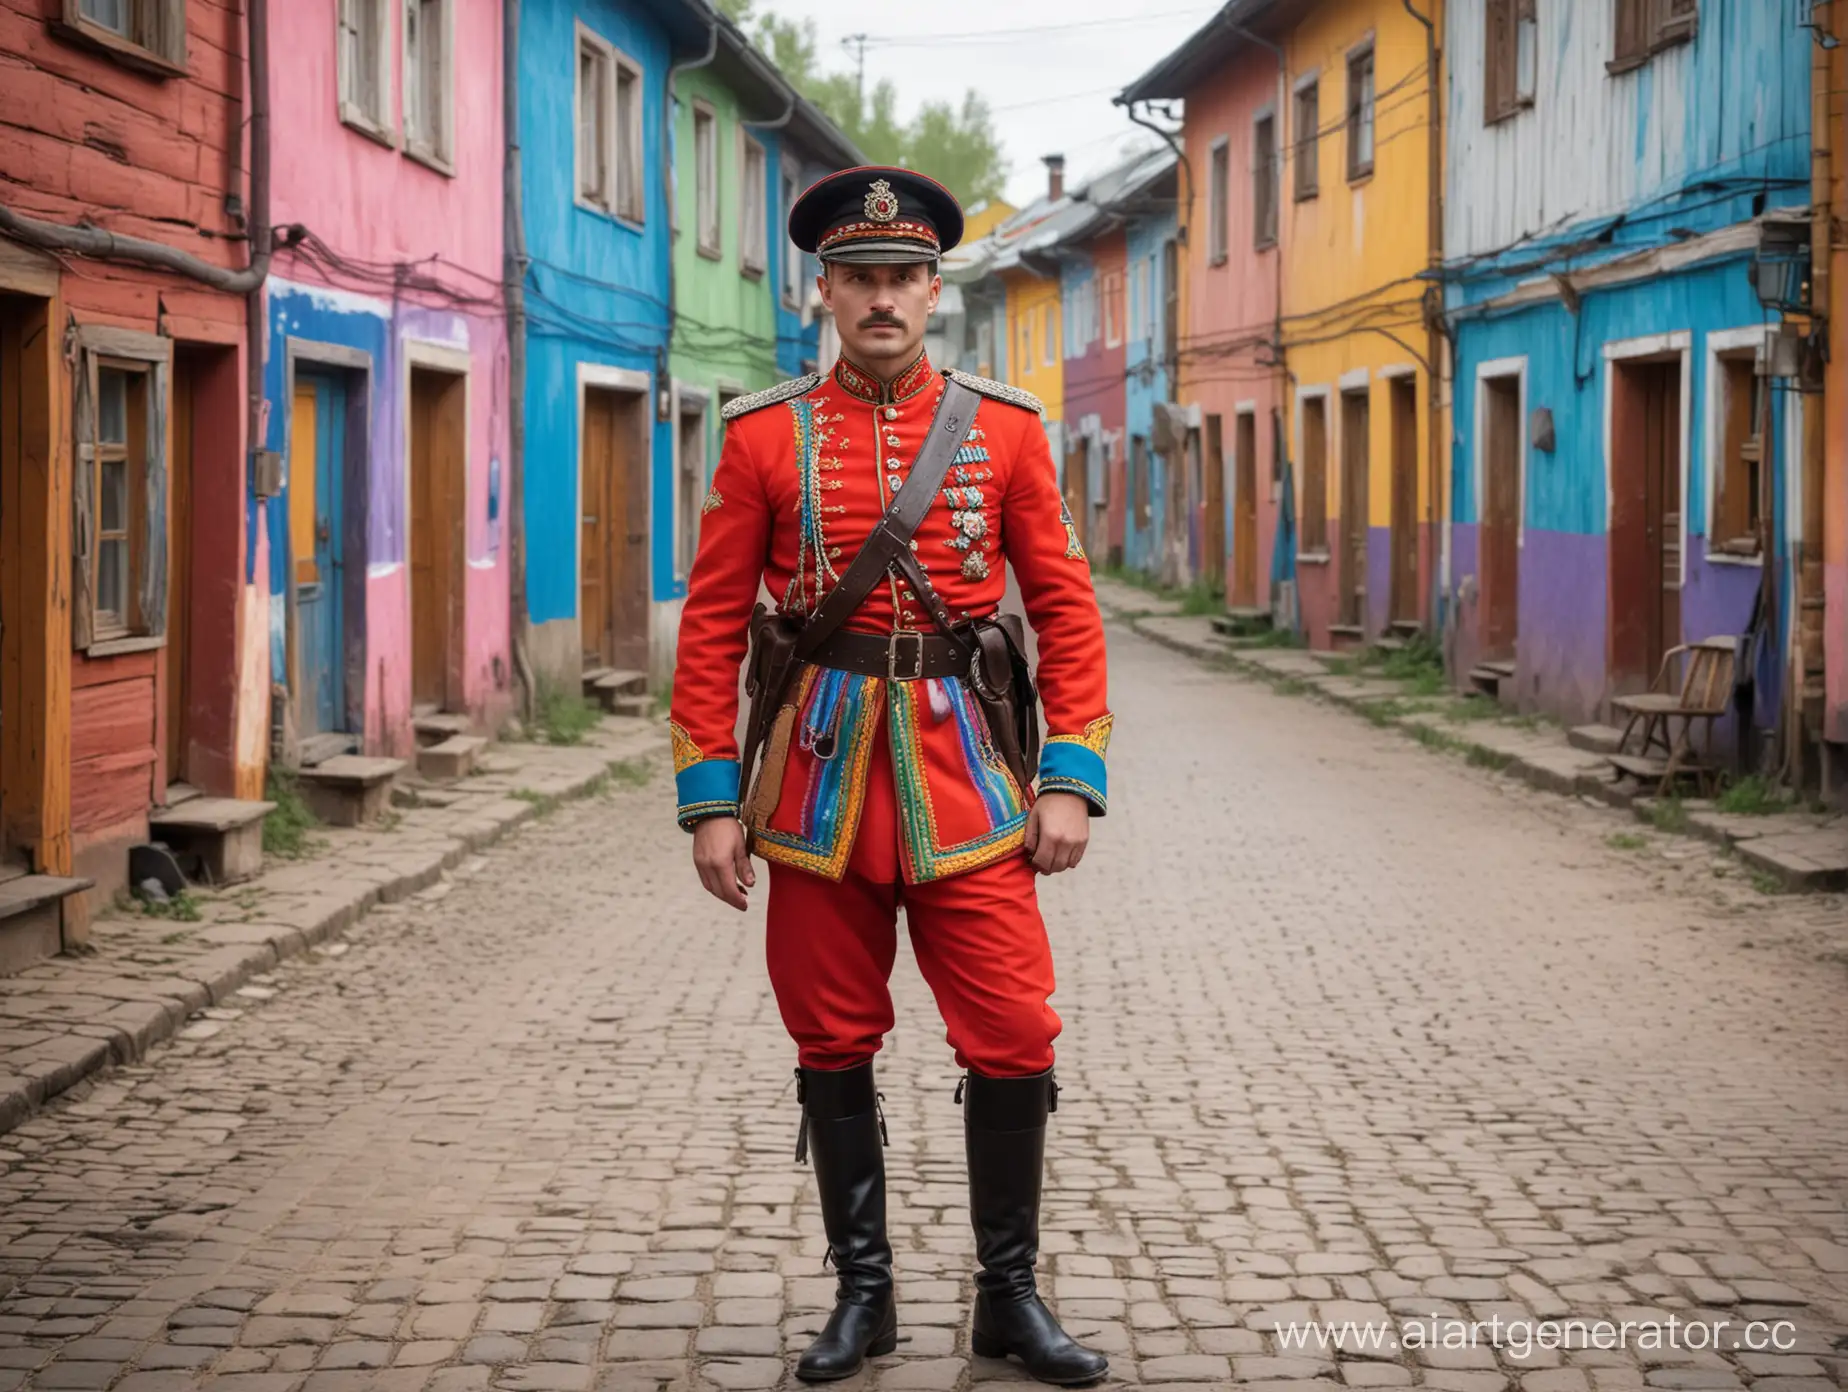 Colorful-Russian-Village-Robbery-by-Brightly-Dressed-Soldier